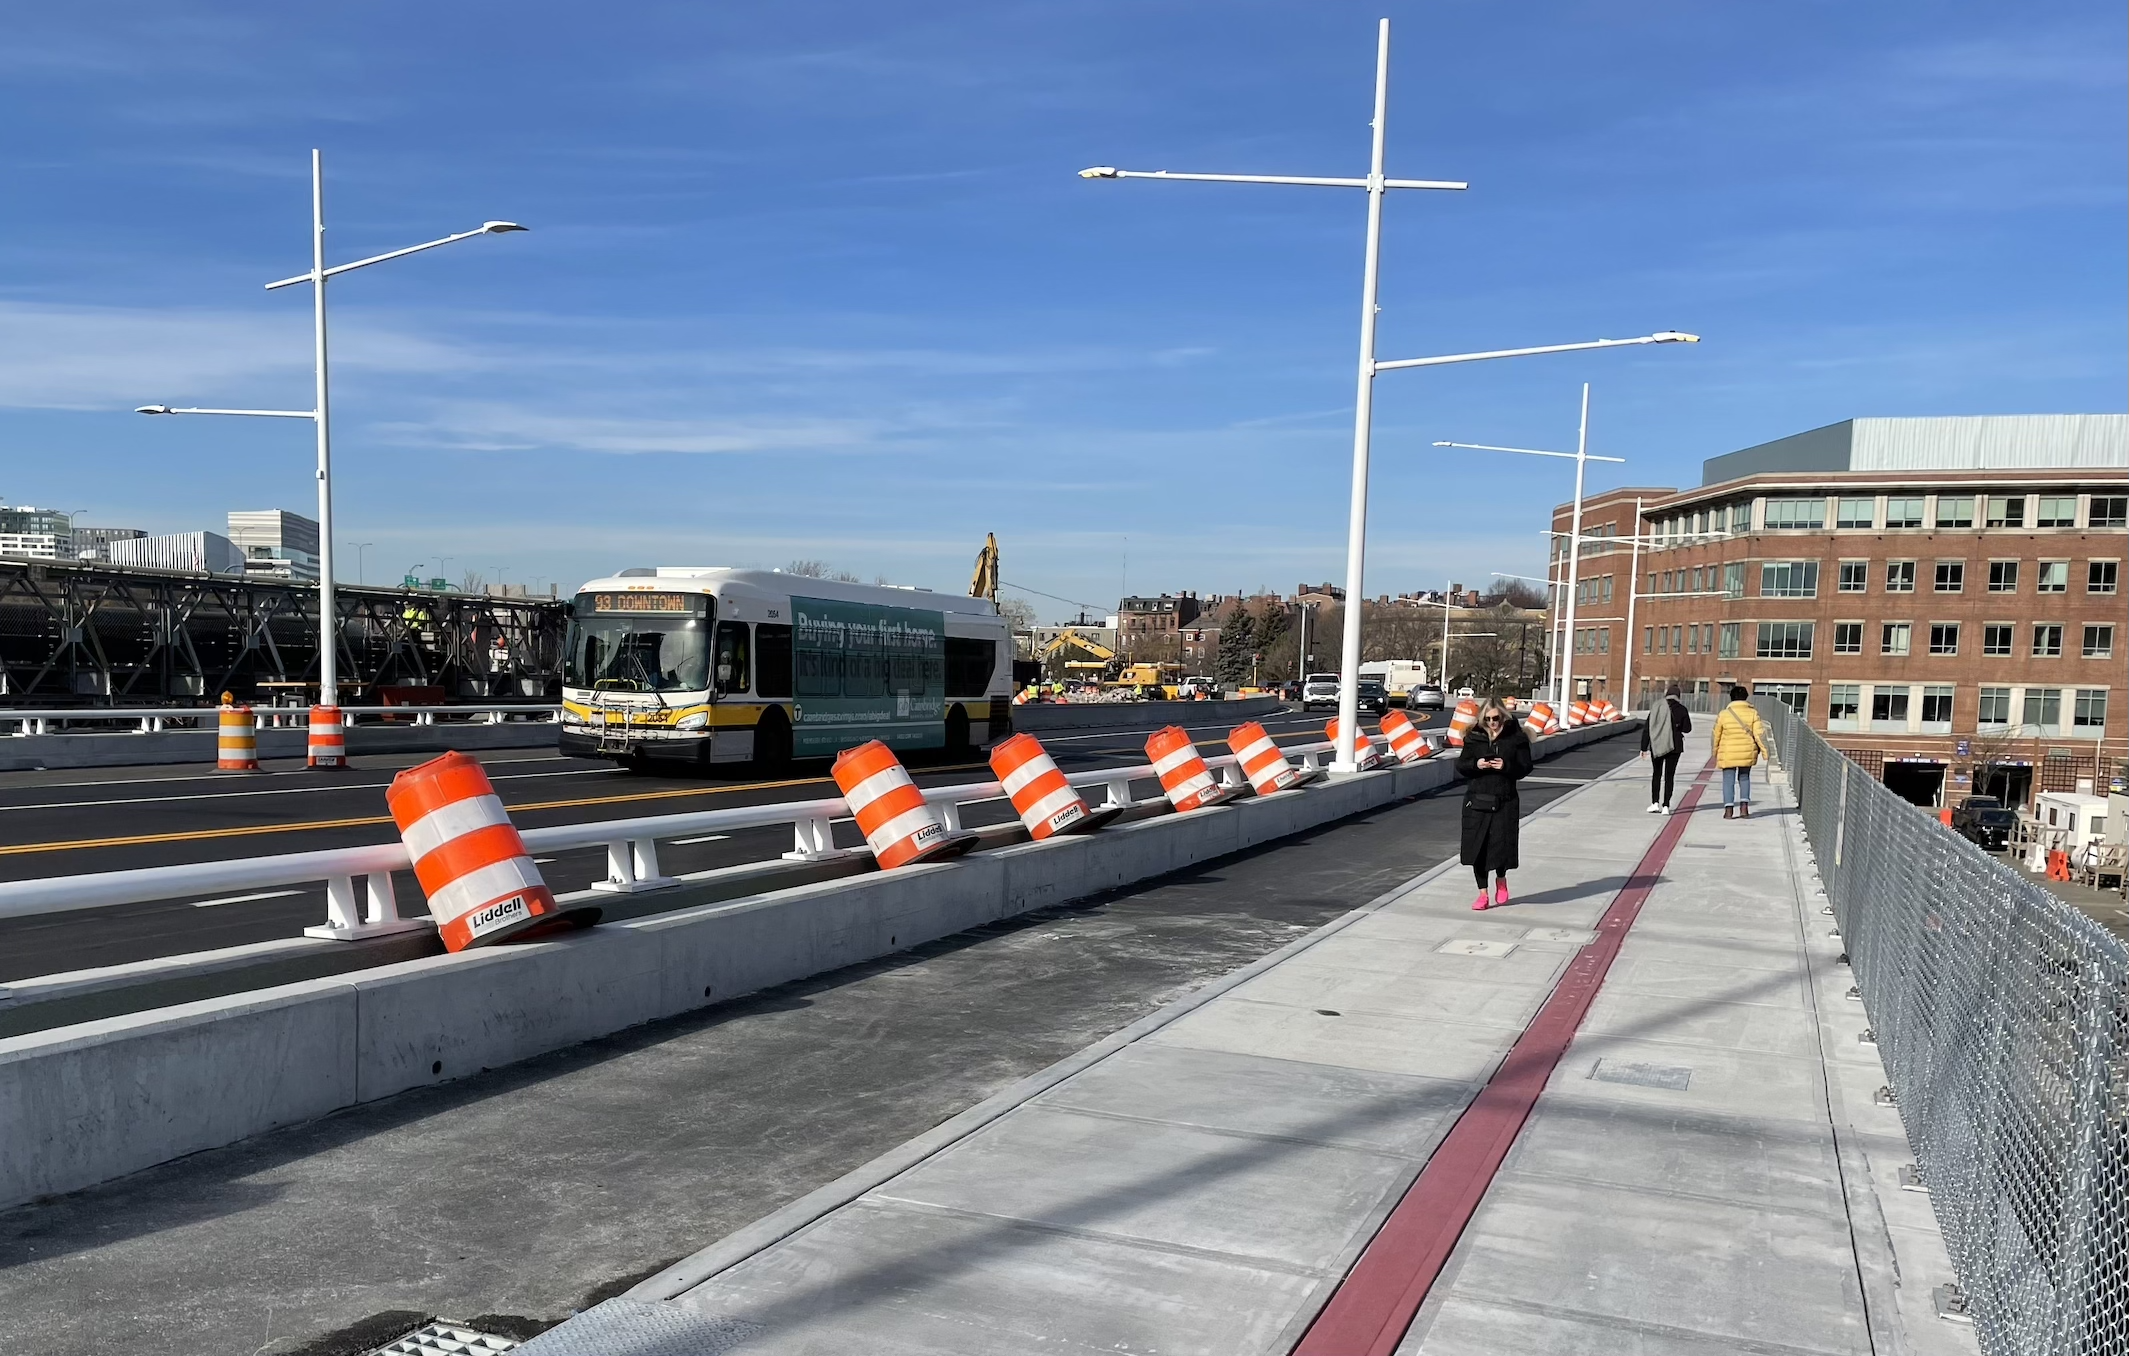 An MBTA 93 bus drives across a new bridge while several pedestrians use the wide sidewalk along the right edge of the photo.